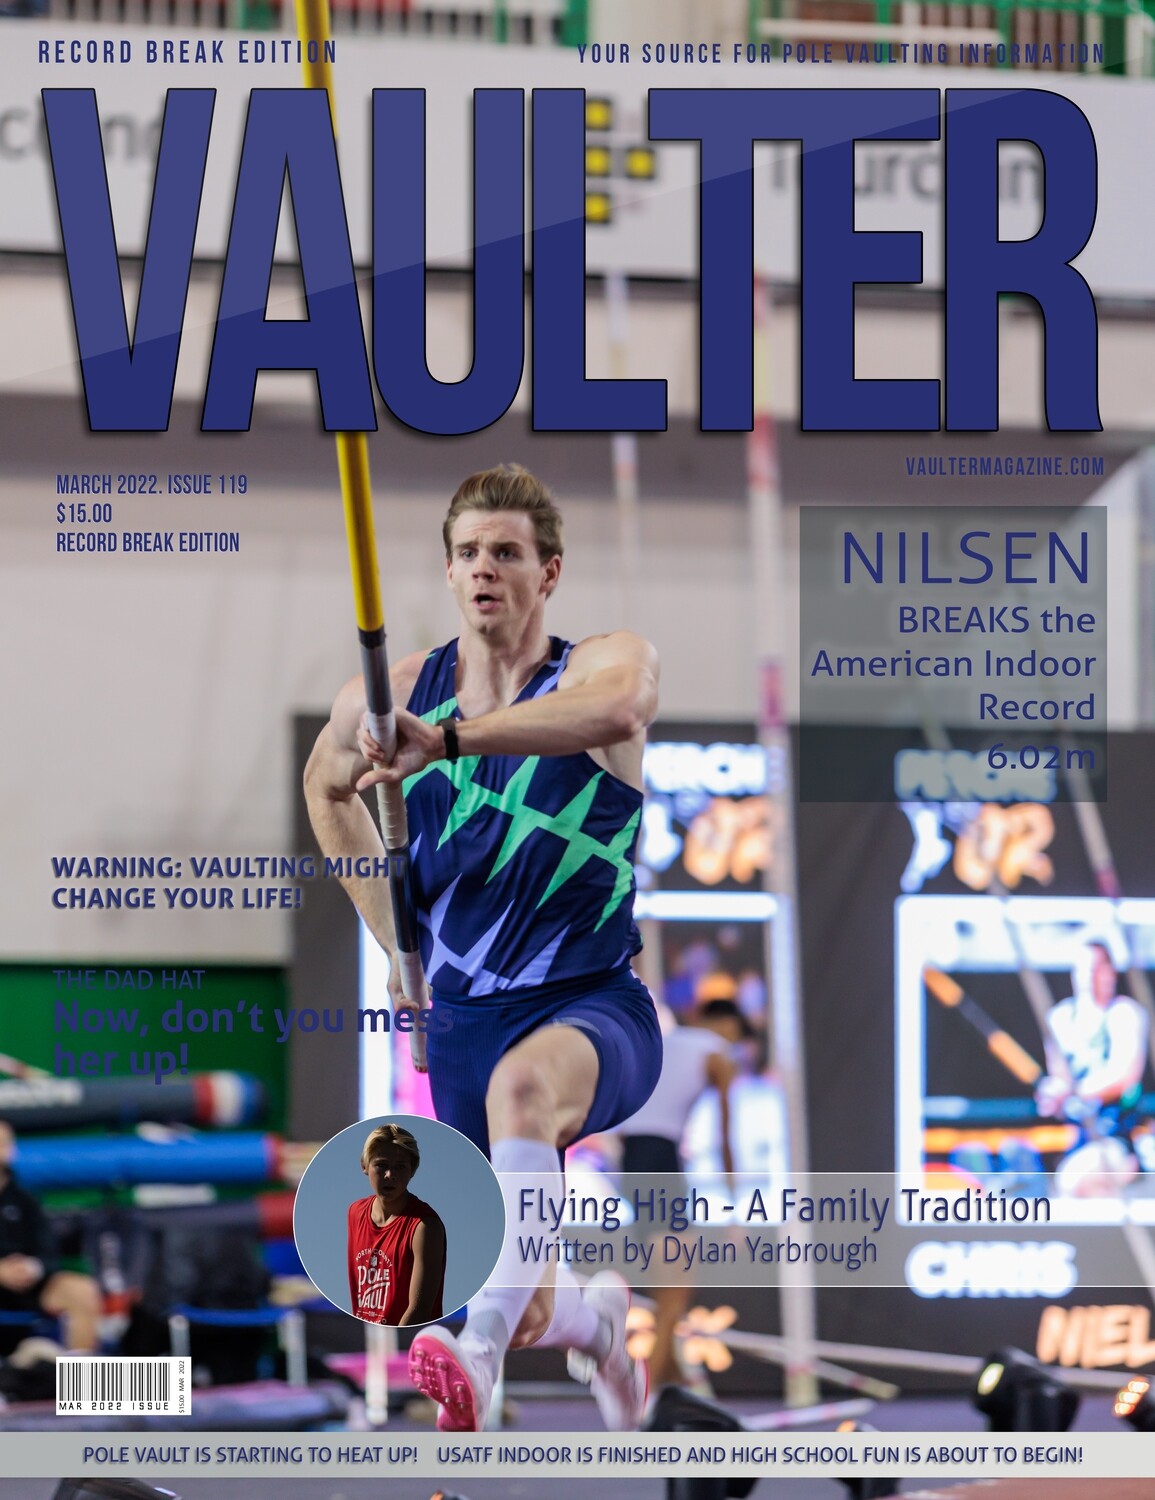 March 2022 American Record Break Issue of Vaulter Magazine - Digital Download